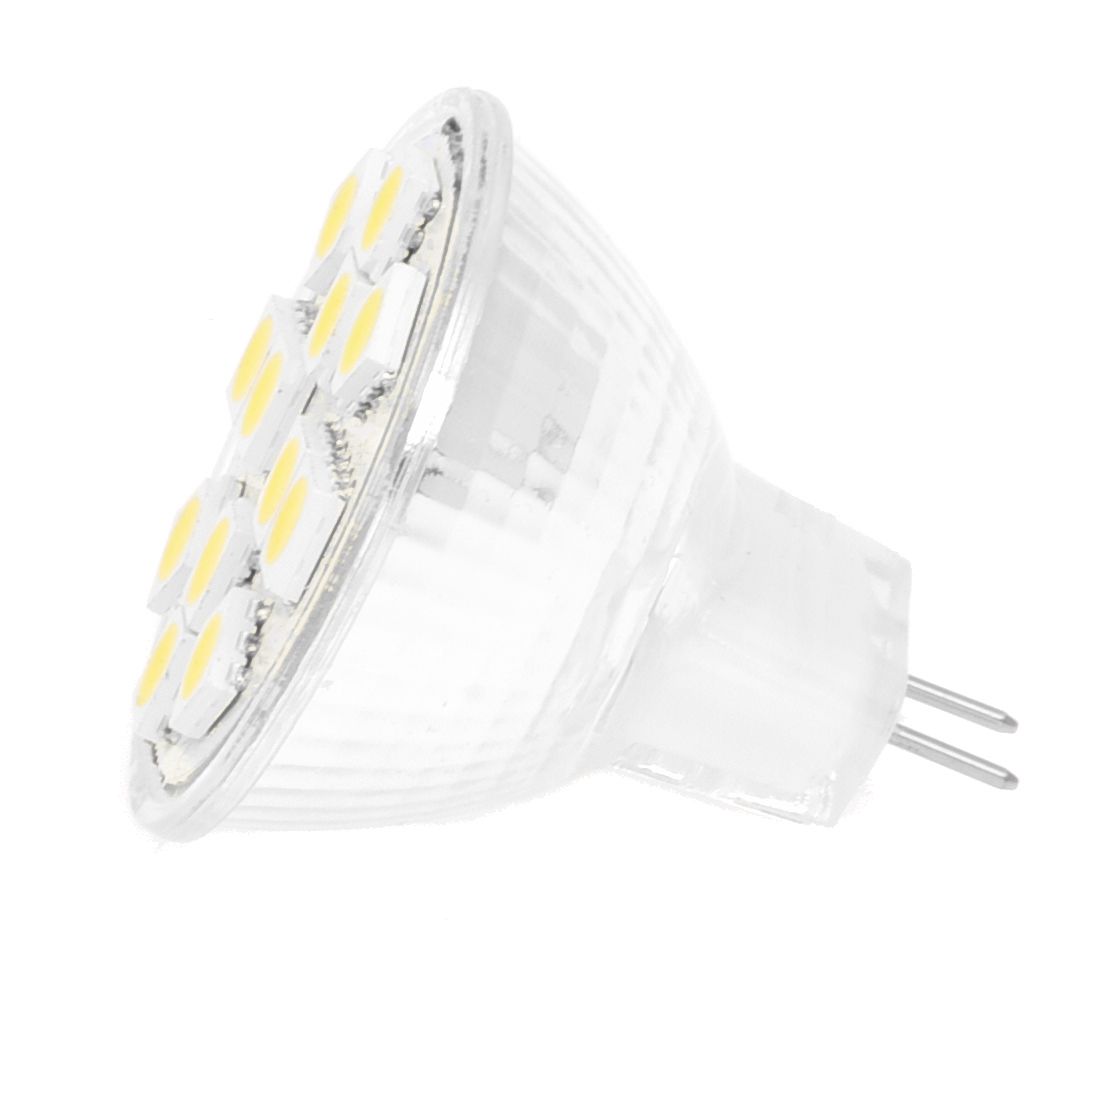 Top 2W MR11 GU4 120-144LM Led Lamp 12 5050 Smd Witte Lamp